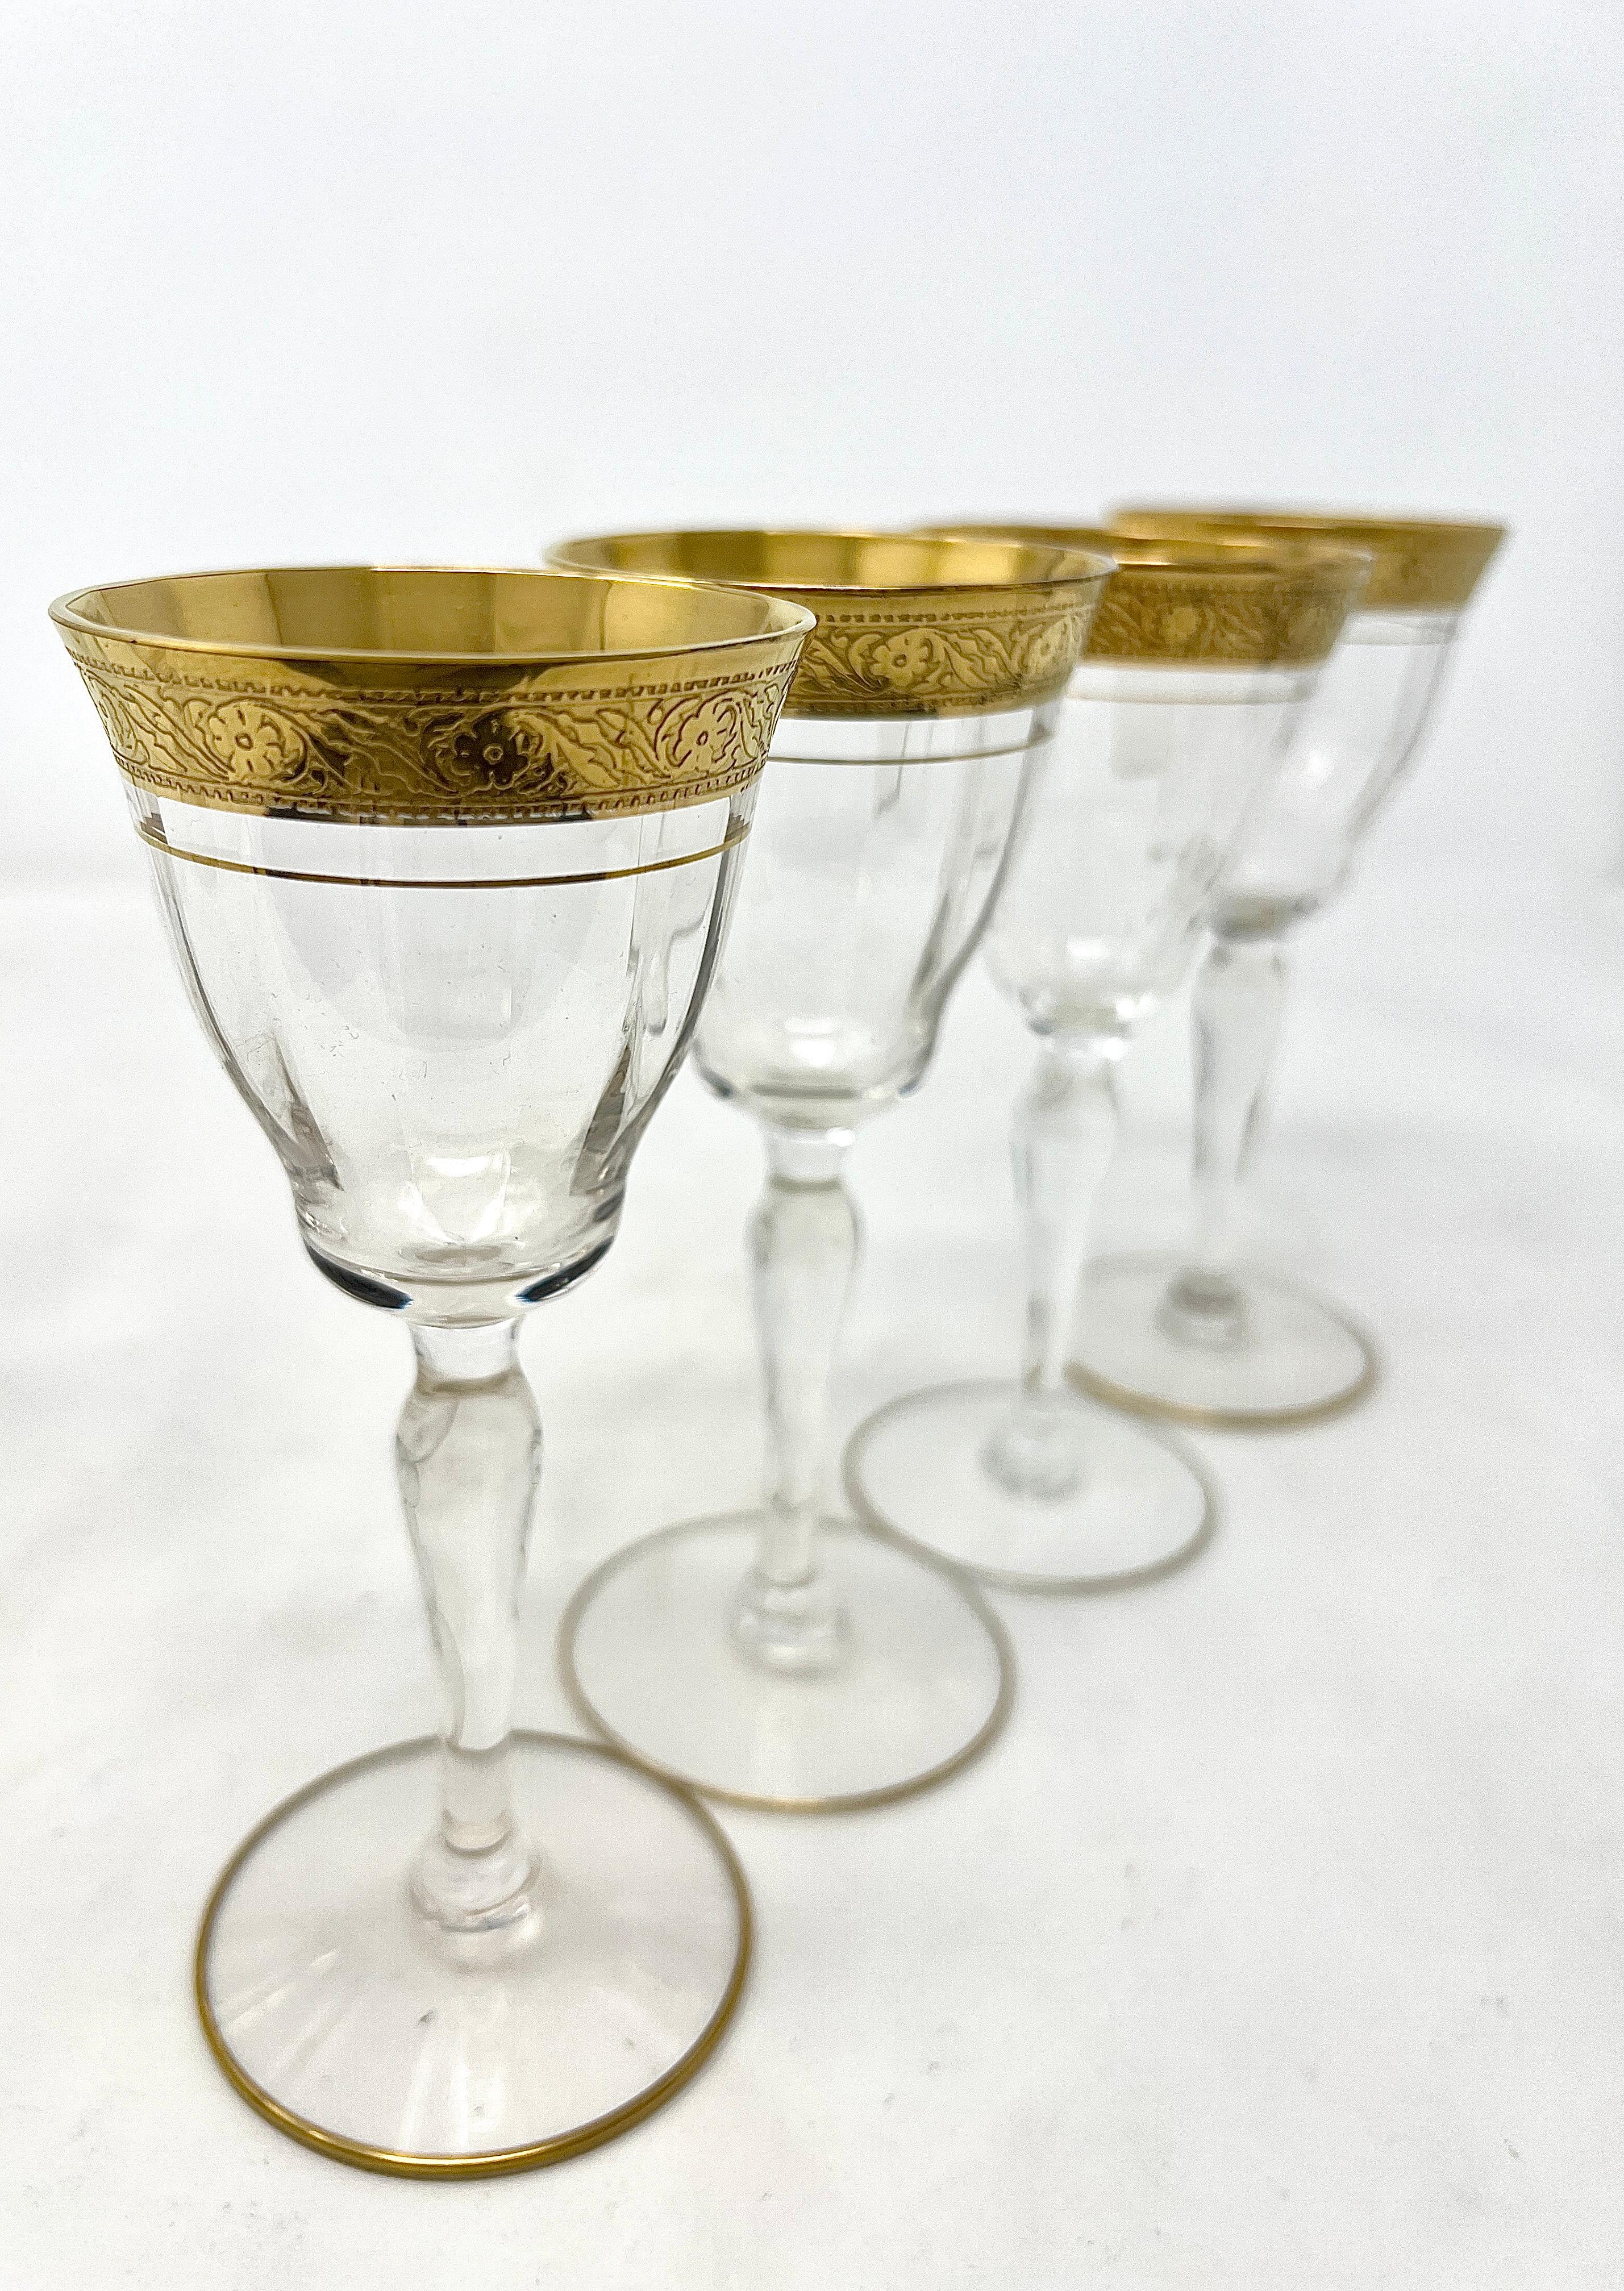 20th Century Set of 8 Estate Cut Crystal with Gold Etching Cordial Glasses, Circa 1930-1940. For Sale